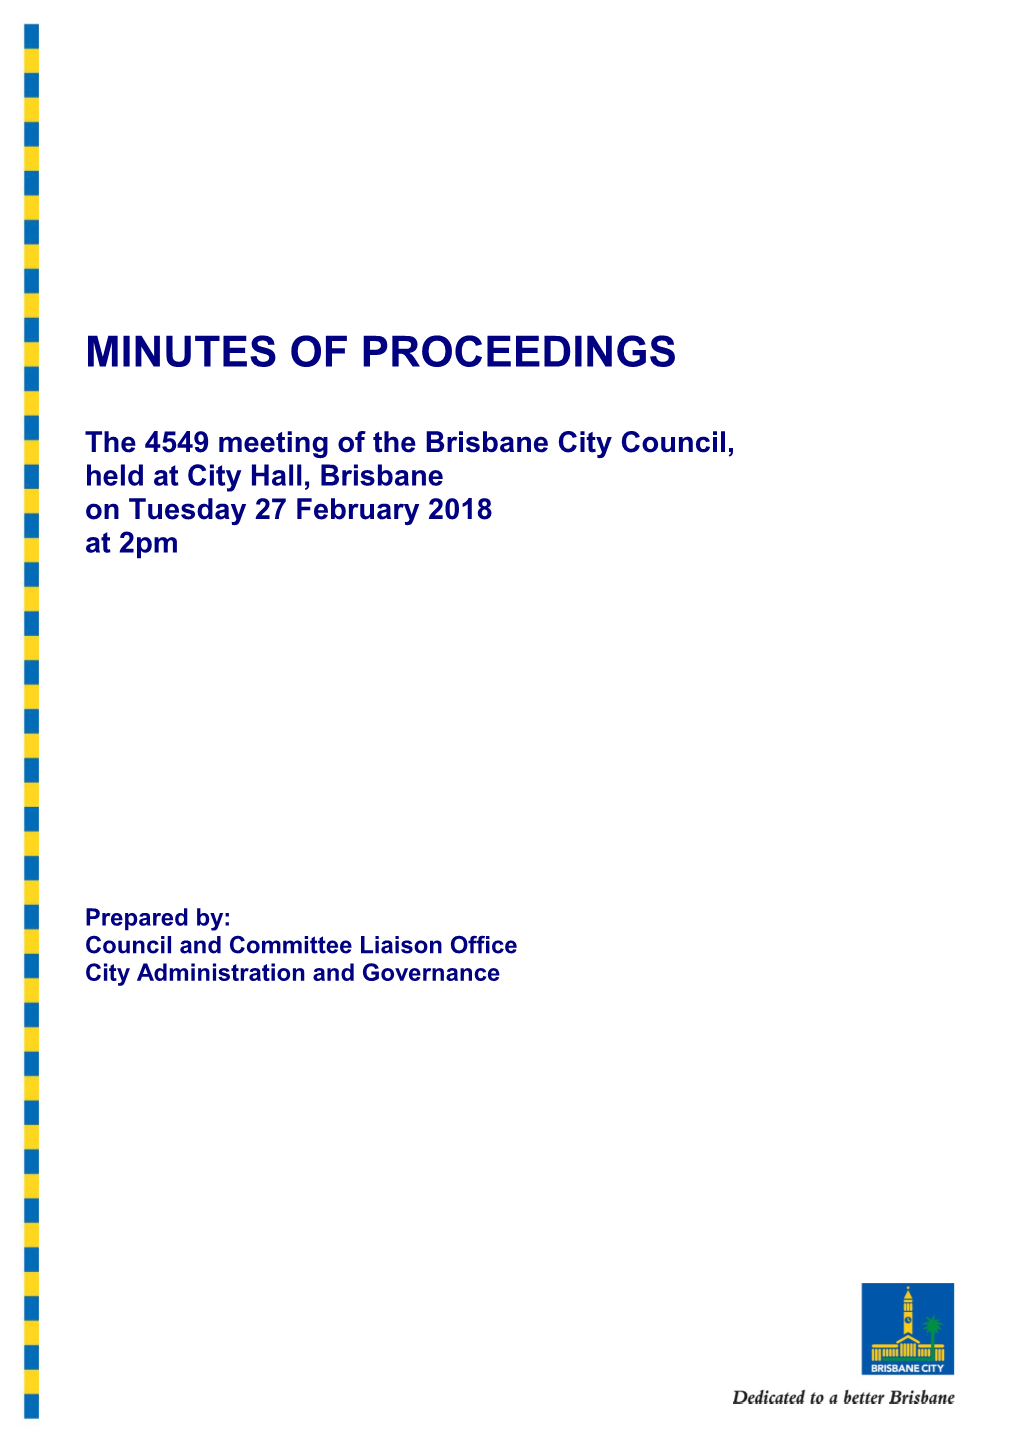 The 4549 Meeting of the Brisbane City Council